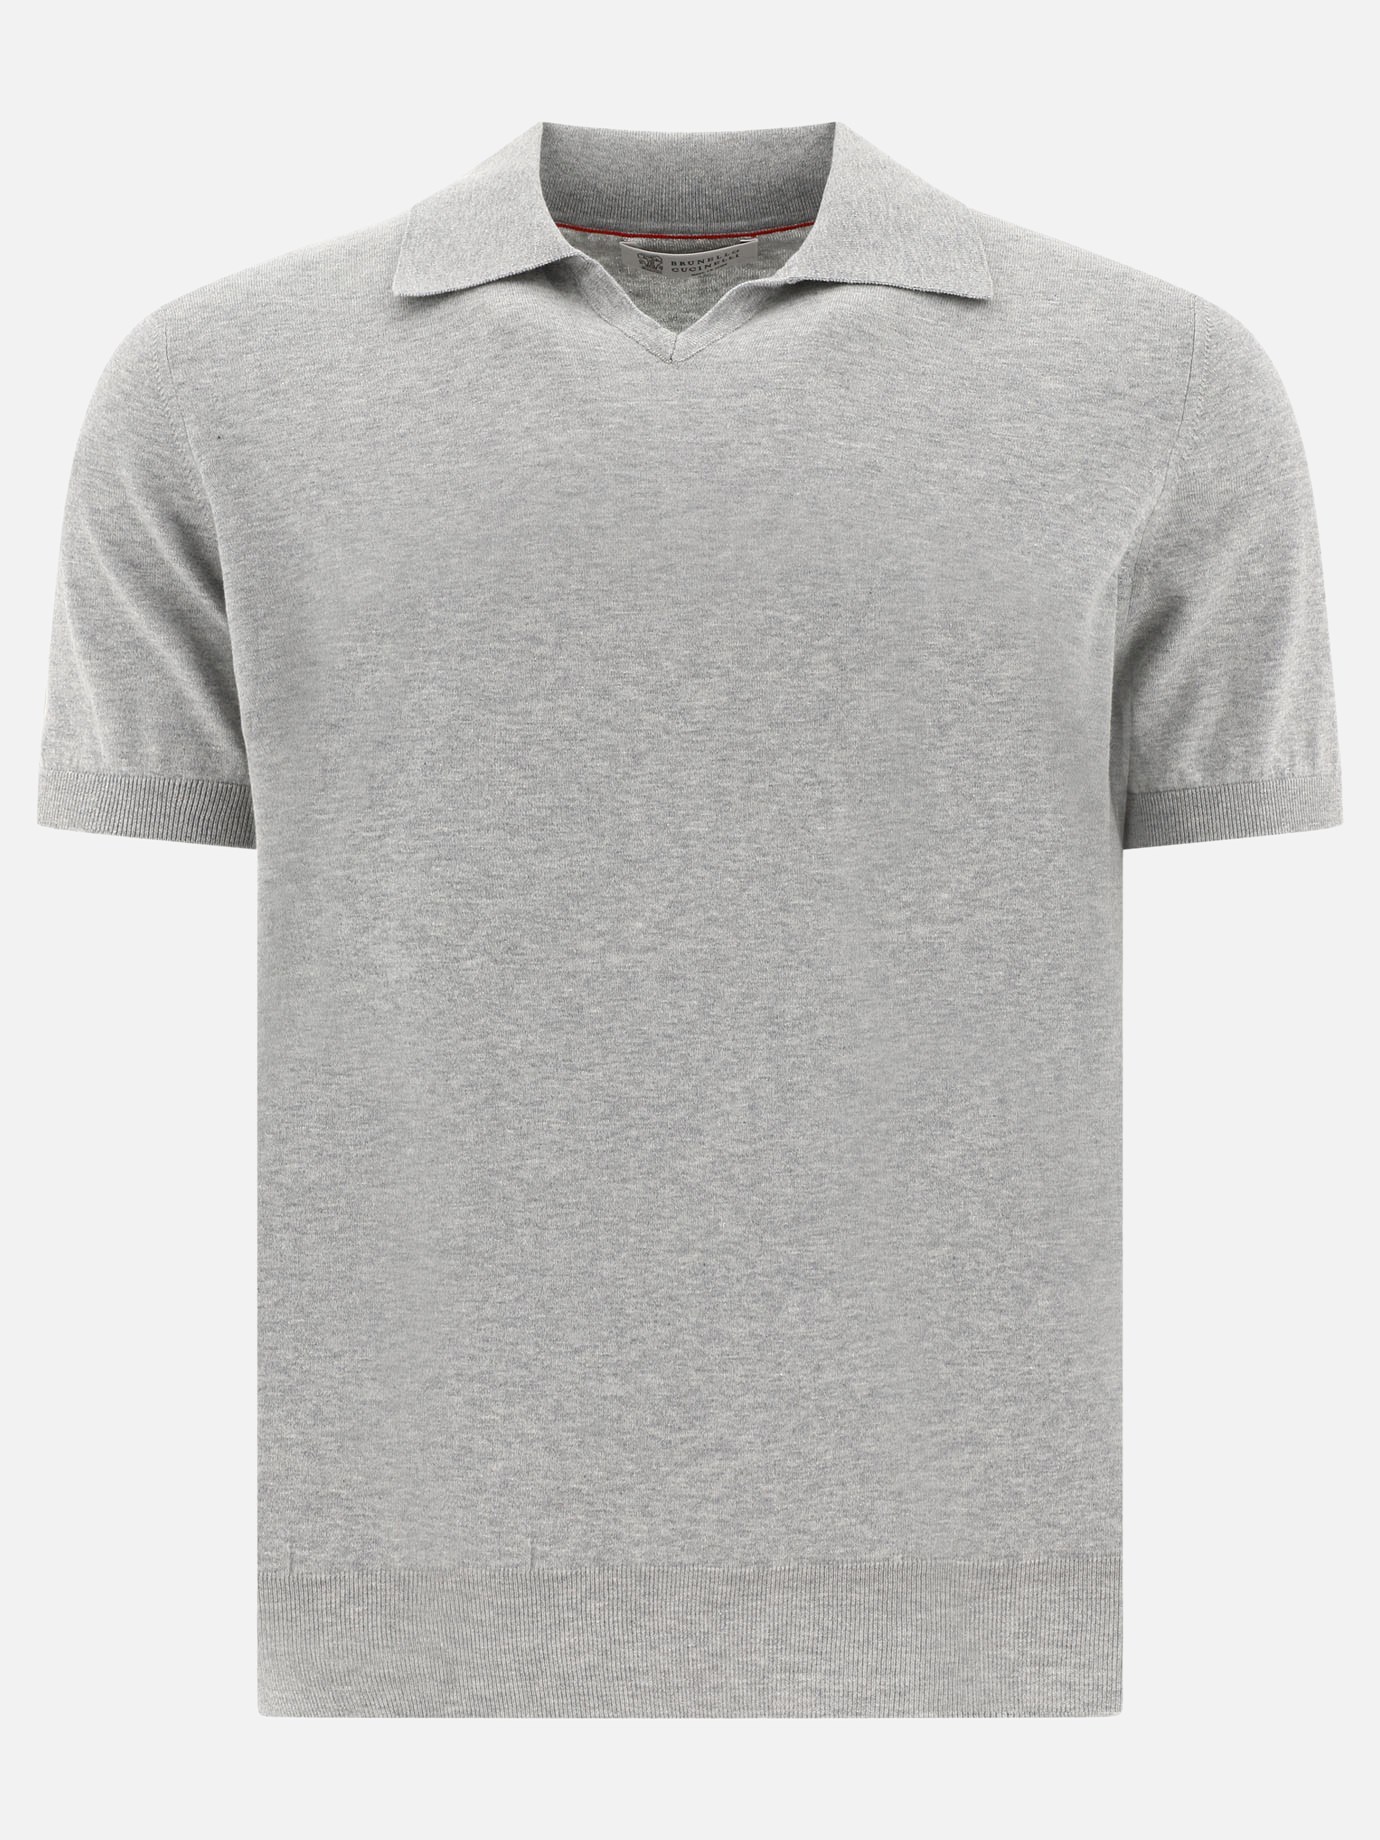 Knitted polo shirt by Brunello Cucinelli